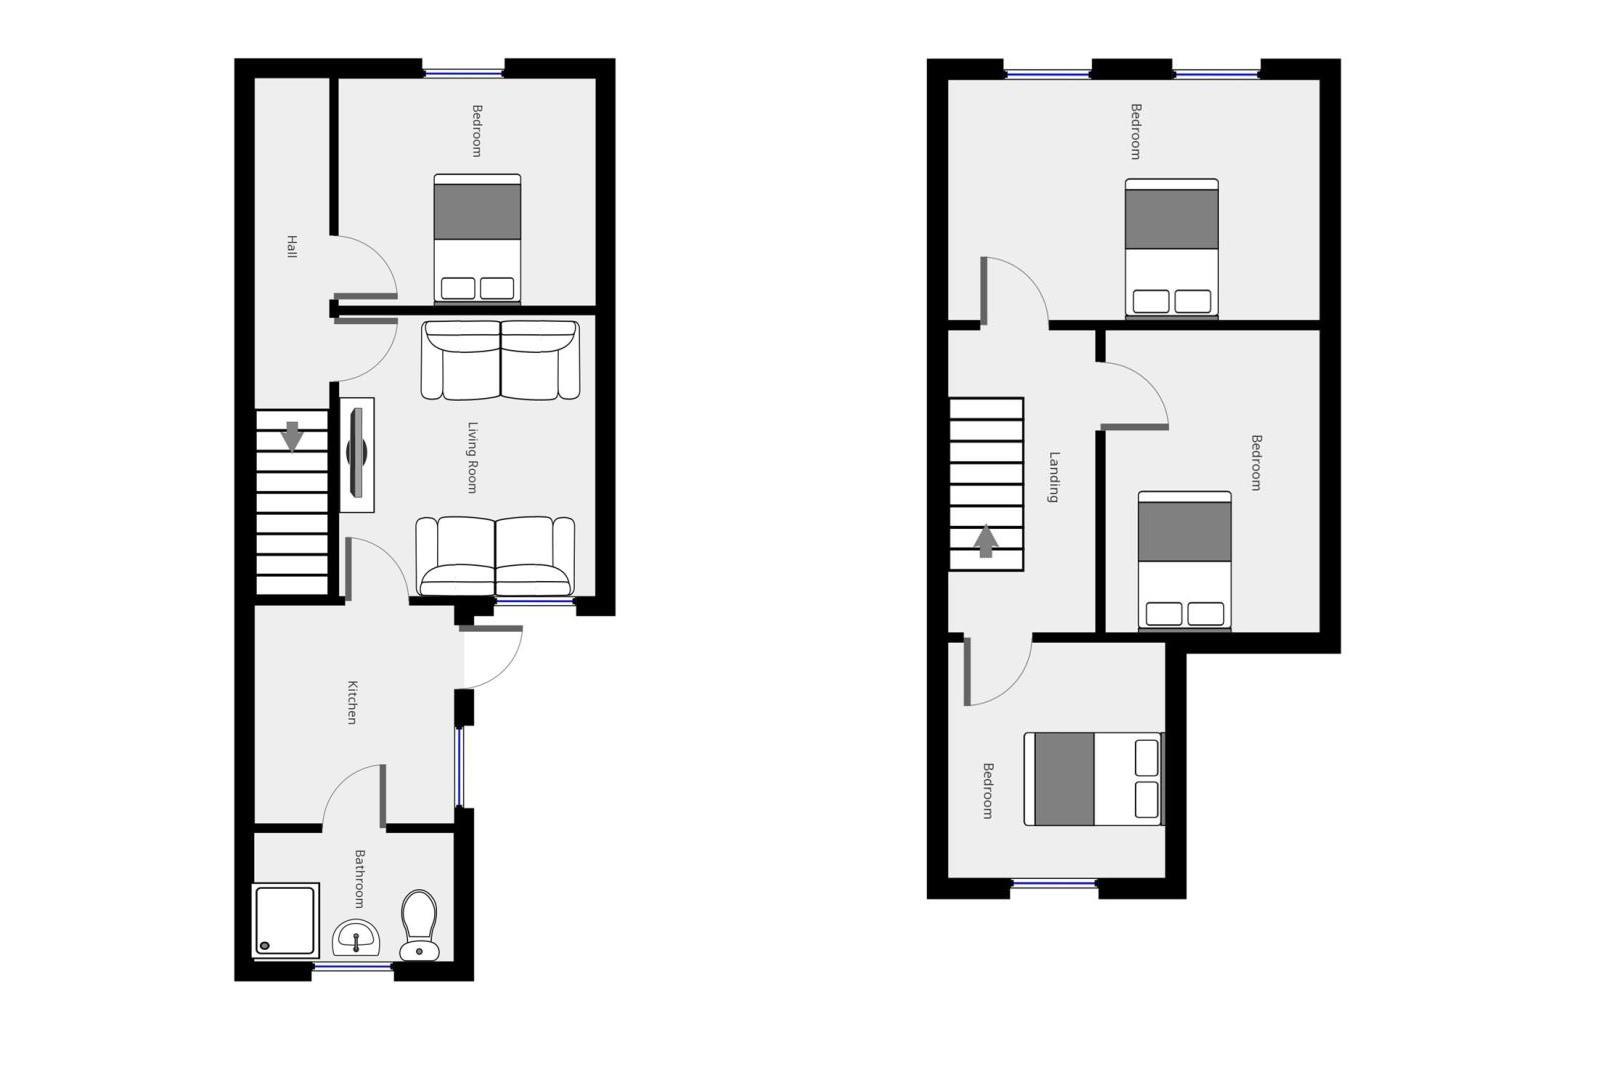 4 bed terraced house to rent in Robert Street, Cardiff - Property floorplan